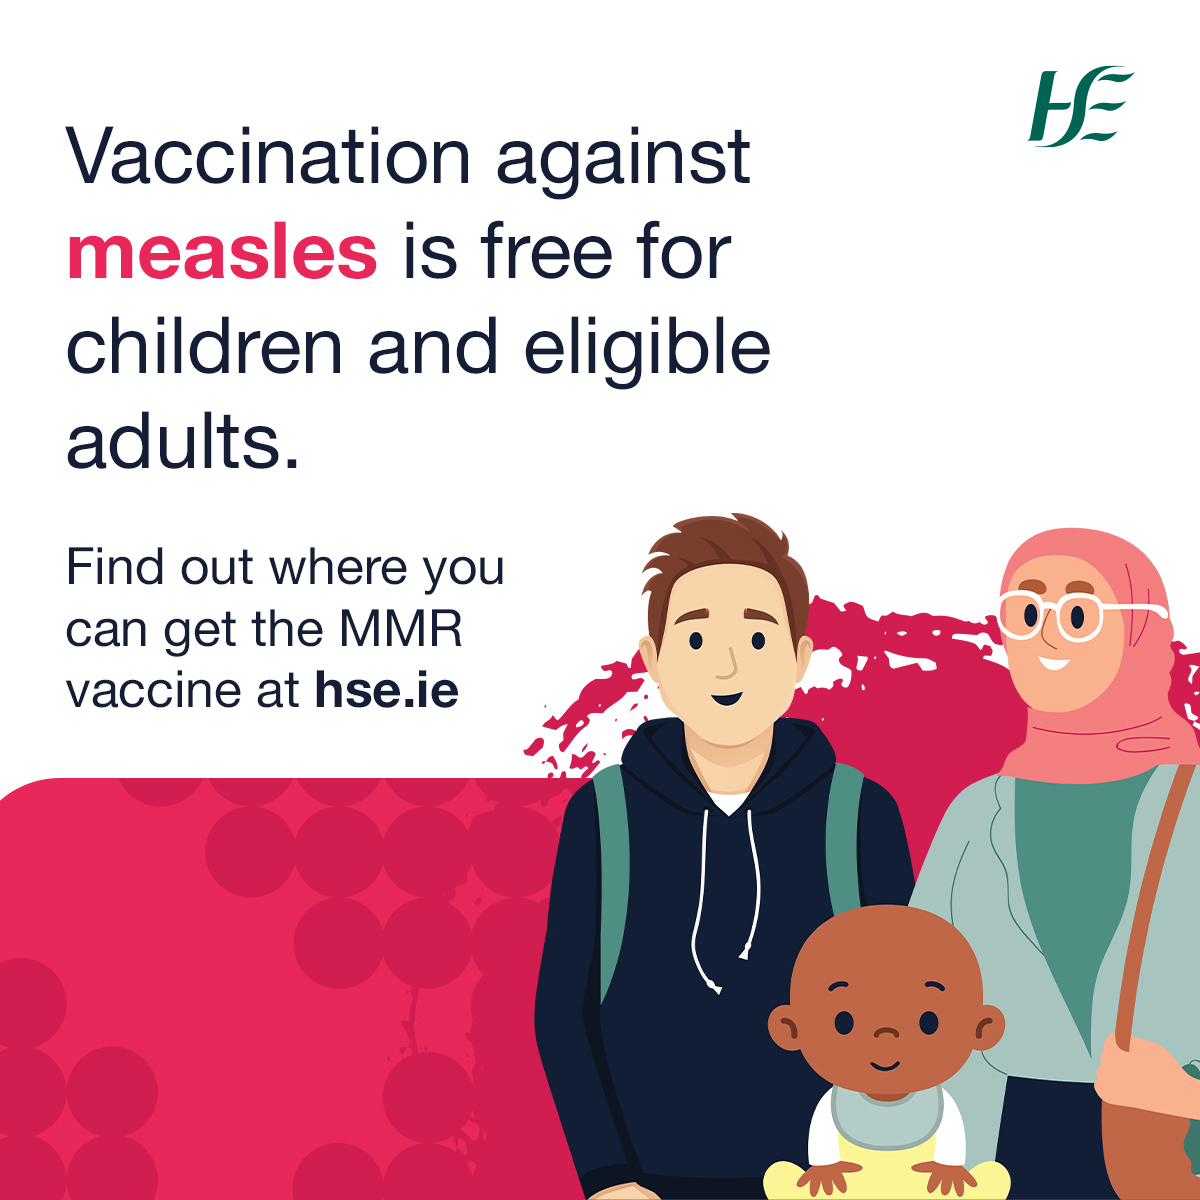 Vaccination against measles is free for children and eligible adults. Don't let cost be a barrier to protecting your health. Visit our website to find out how to get the vaccine: bit.ly/3USA5f3